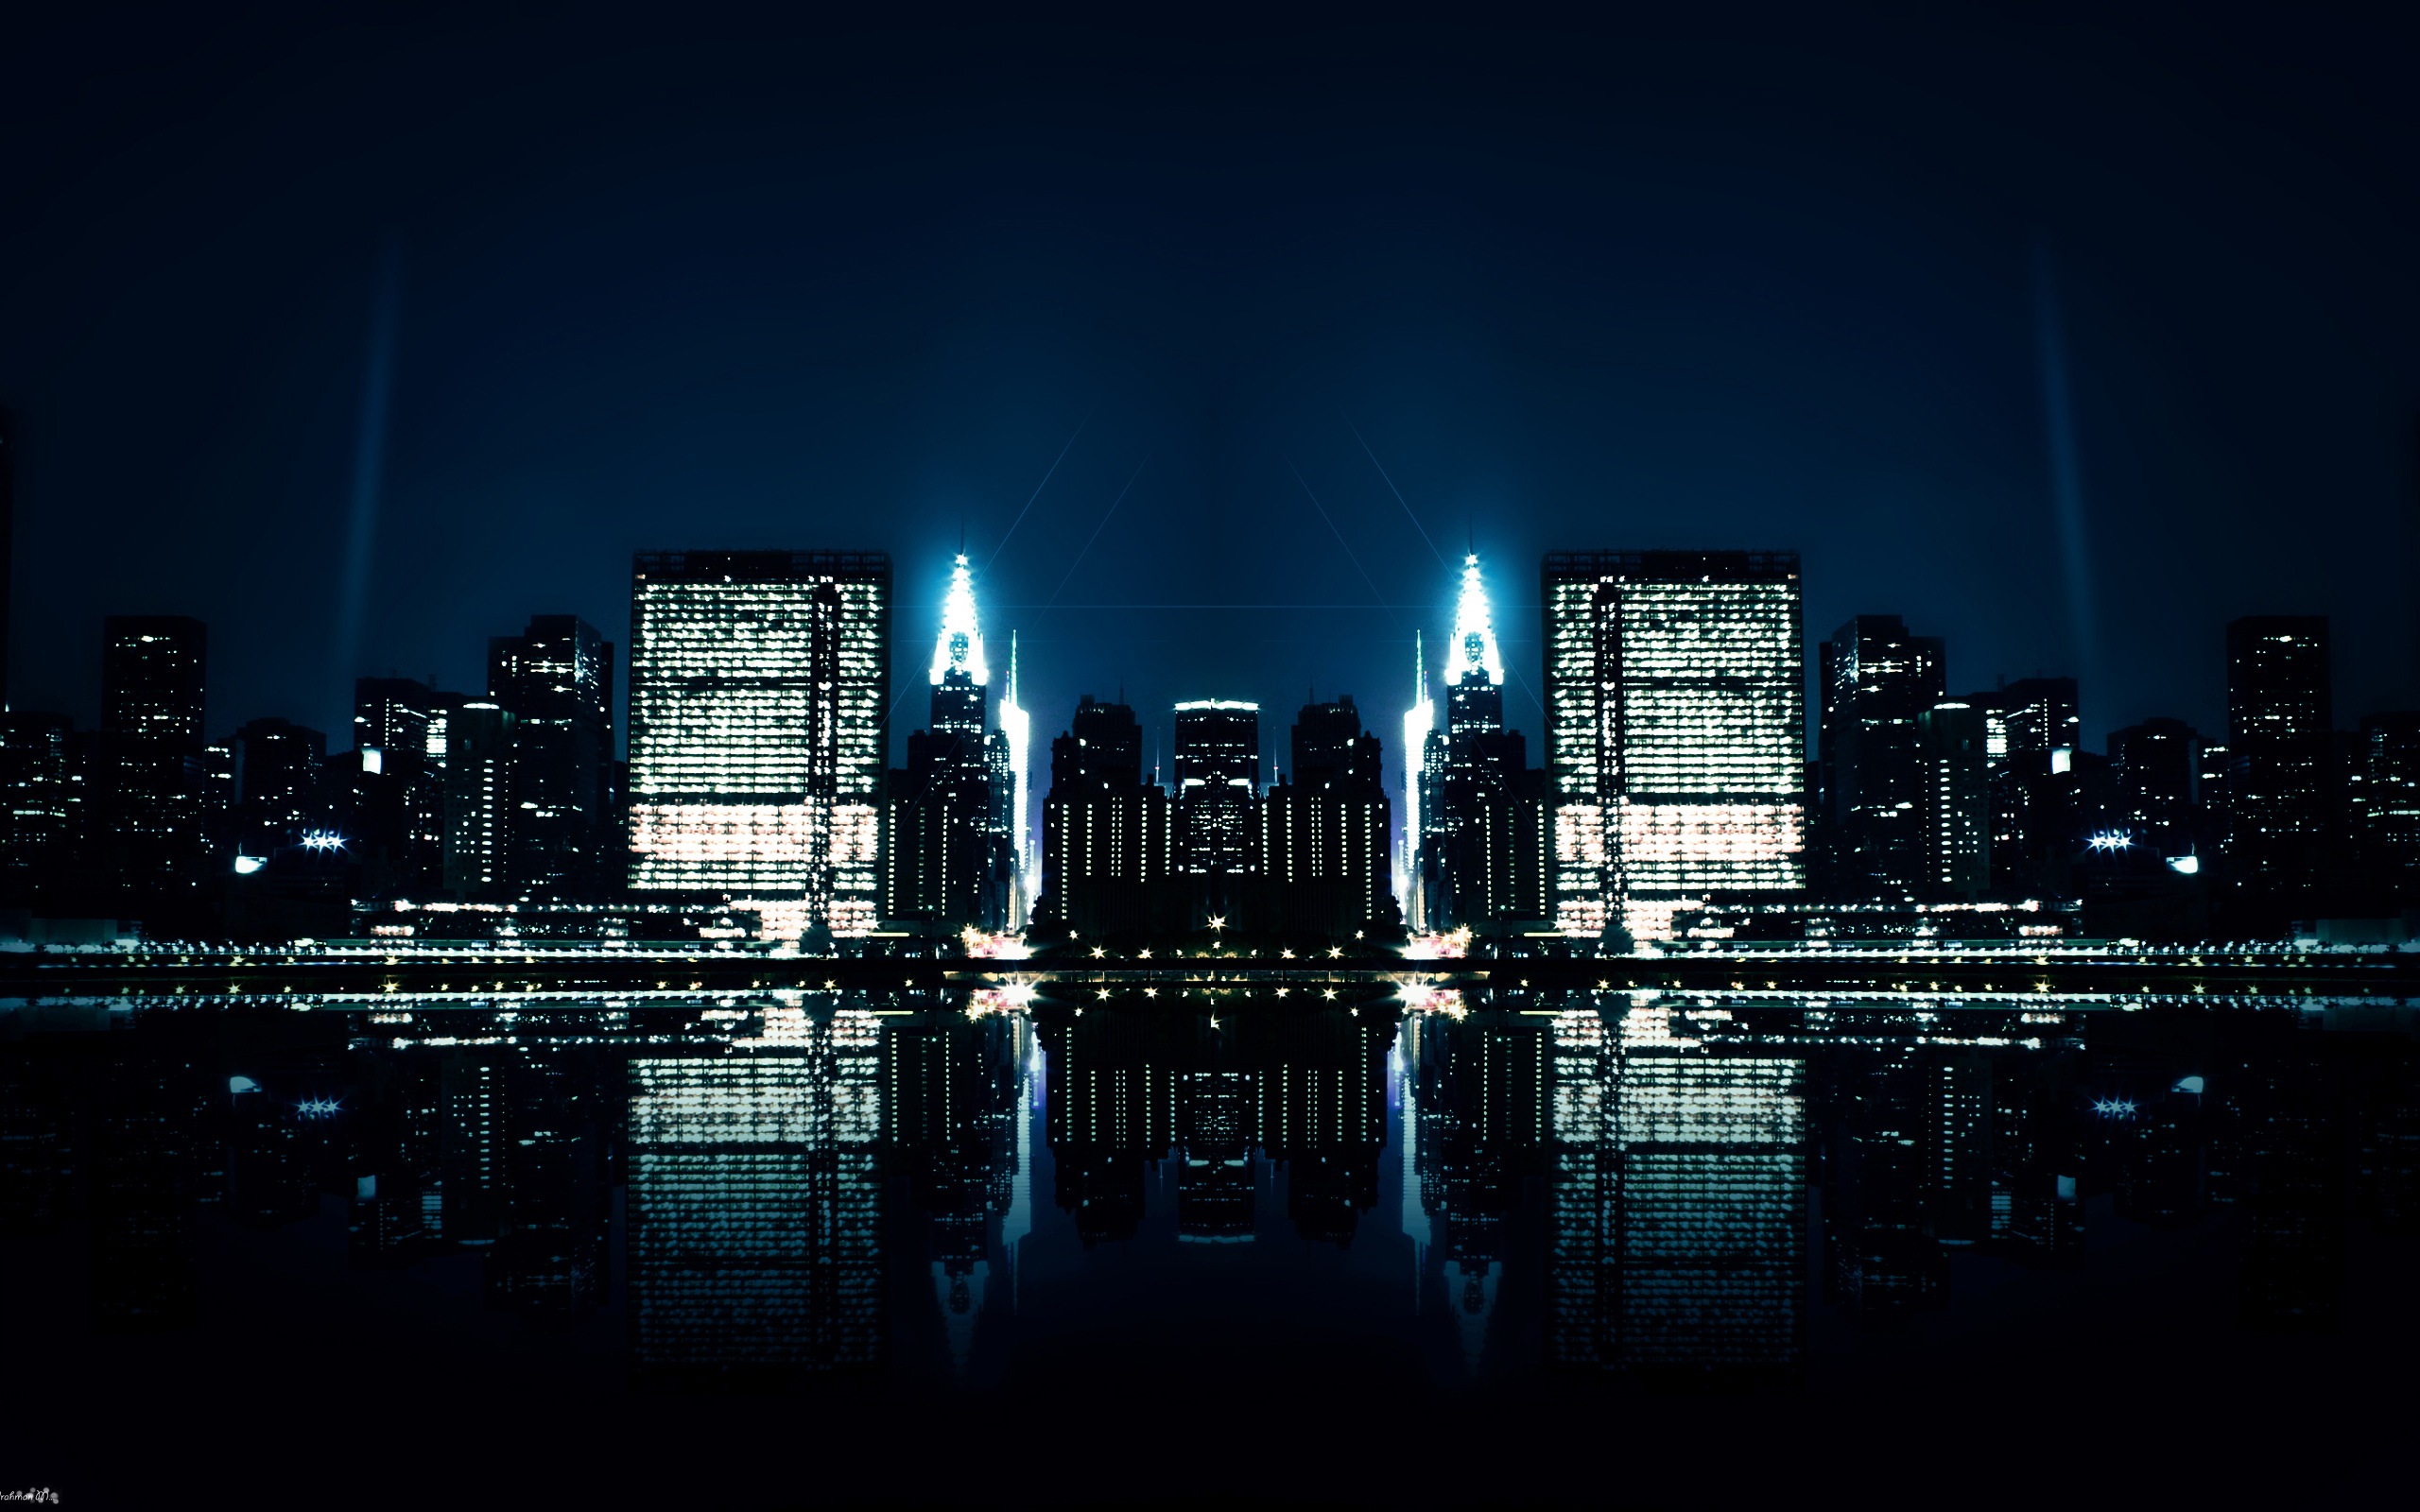 4k Night City Wallpapers High Quality Download Free